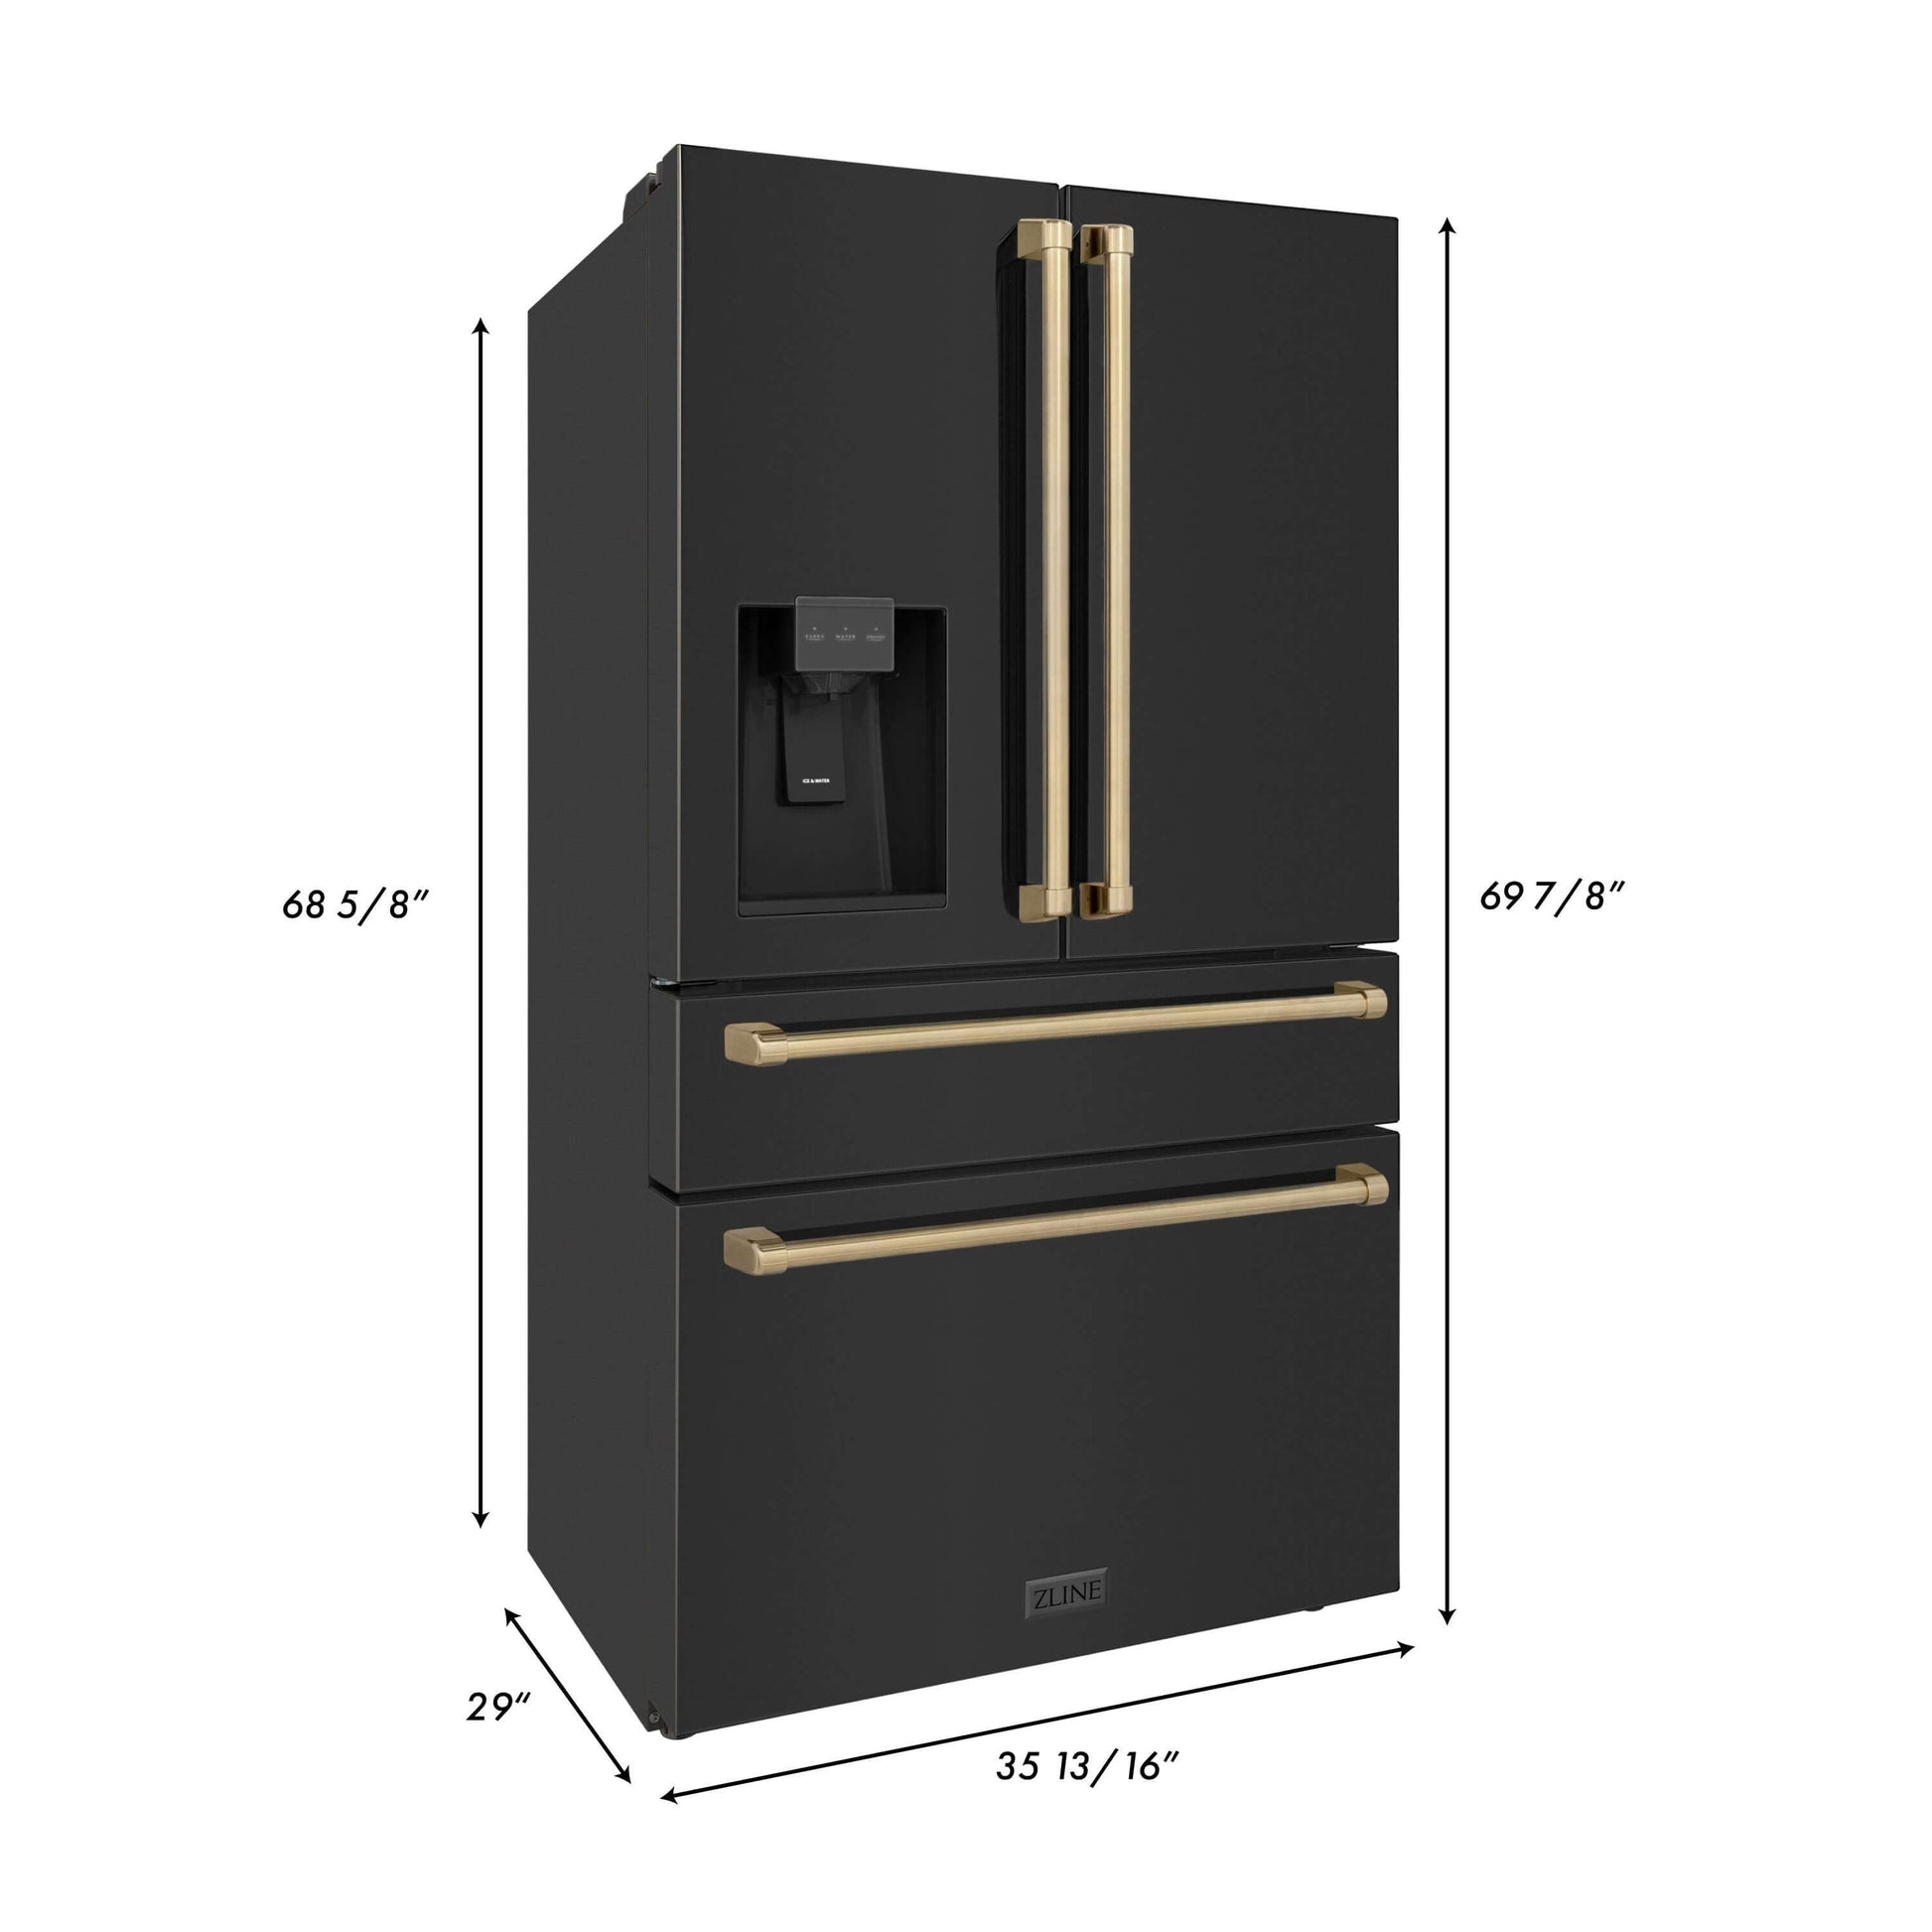 ZLINE 36" Autograph Edition Freestanding French Door Refrigerator - Water and Ice Dispenser in Fingerprint Resistant Black Stainless Steel with Accents